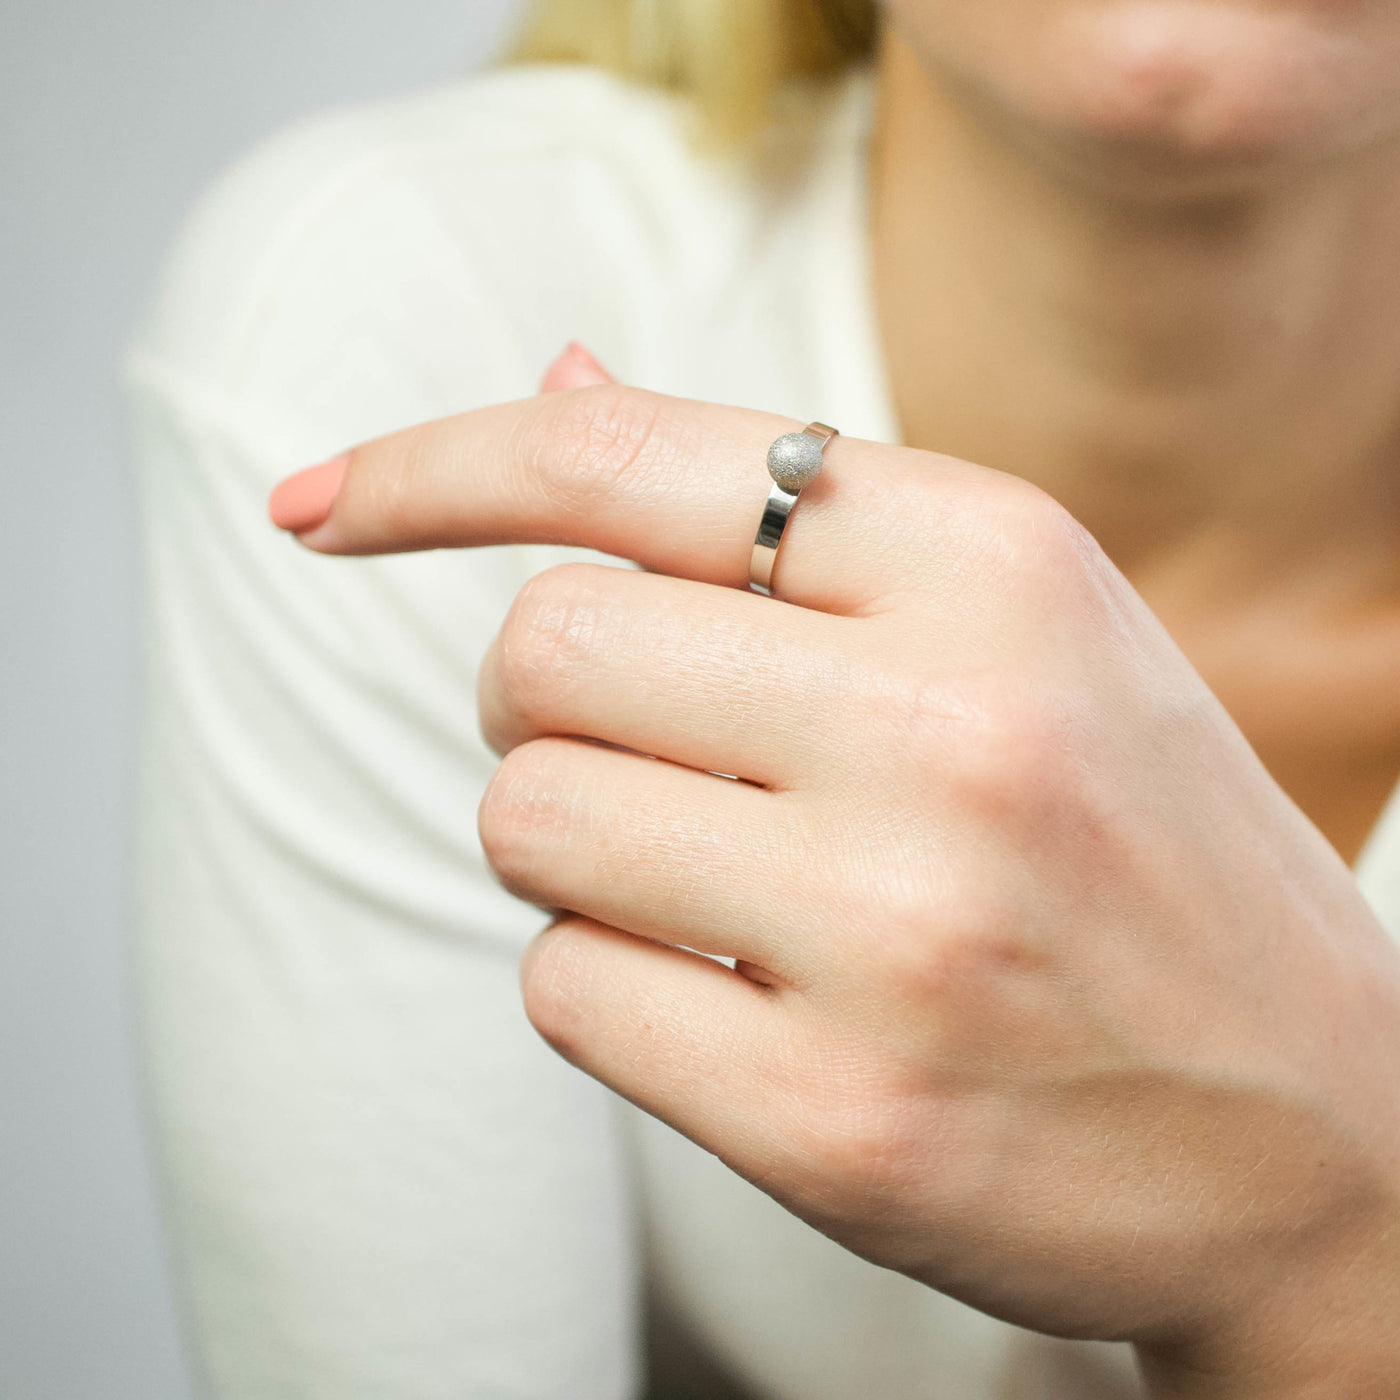 Self Defense Ring on Woman's Hand | Defender Ring